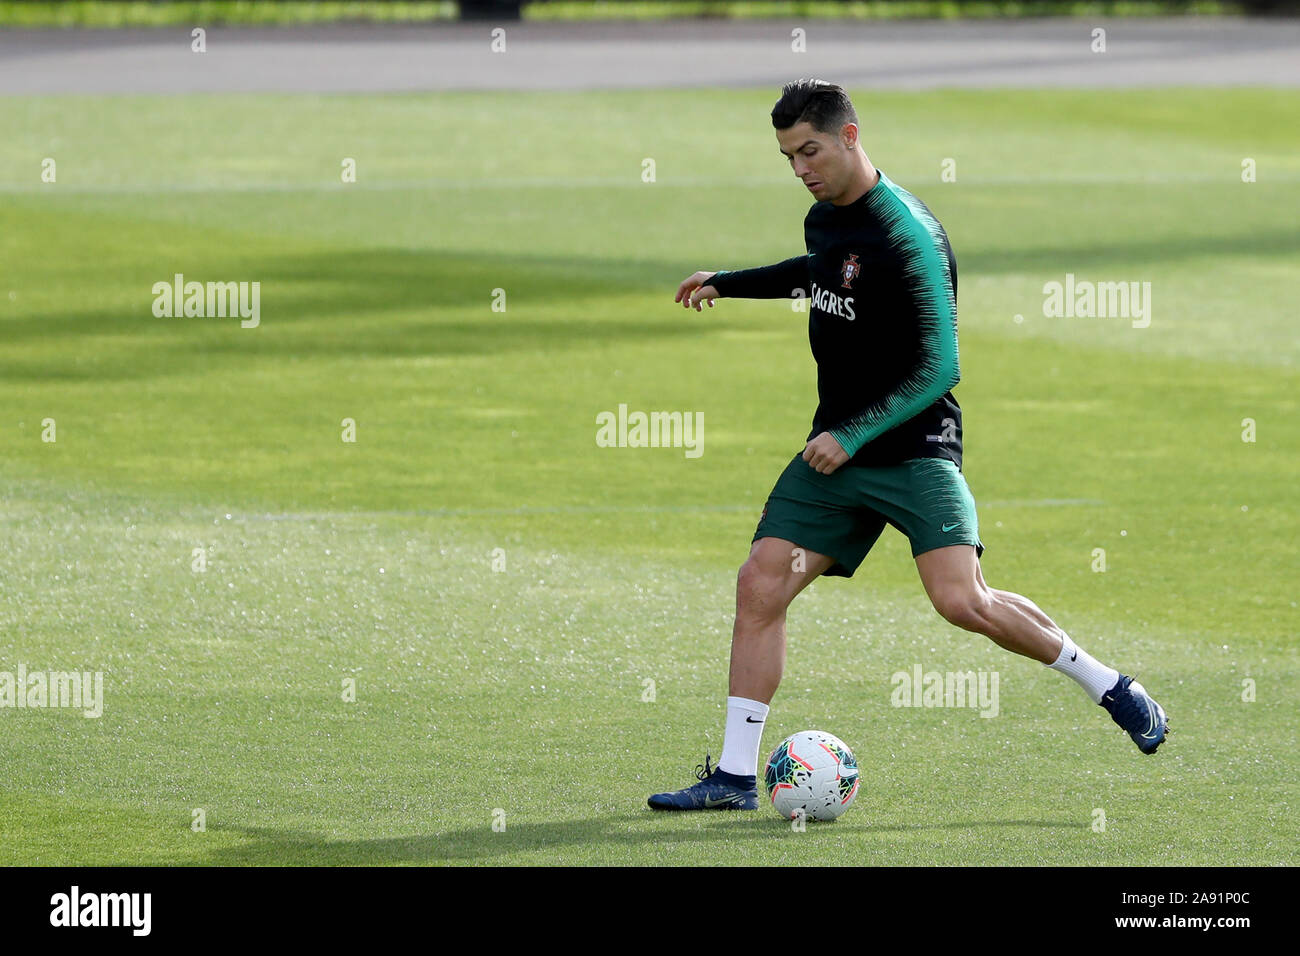 Oeiras, Portugal. 12th Nov, 2019. Portugal's forward Cristiano Ronaldo in action during a training session at Cidade do Futebol (Football City) training camp in Oeiras, Portugal, on November 12, 2019, ahead of the UEFA EURO 2020 qualifier match against Lithuania. Credit: Pedro Fiuza/ZUMA Wire/Alamy Live News Stock Photo